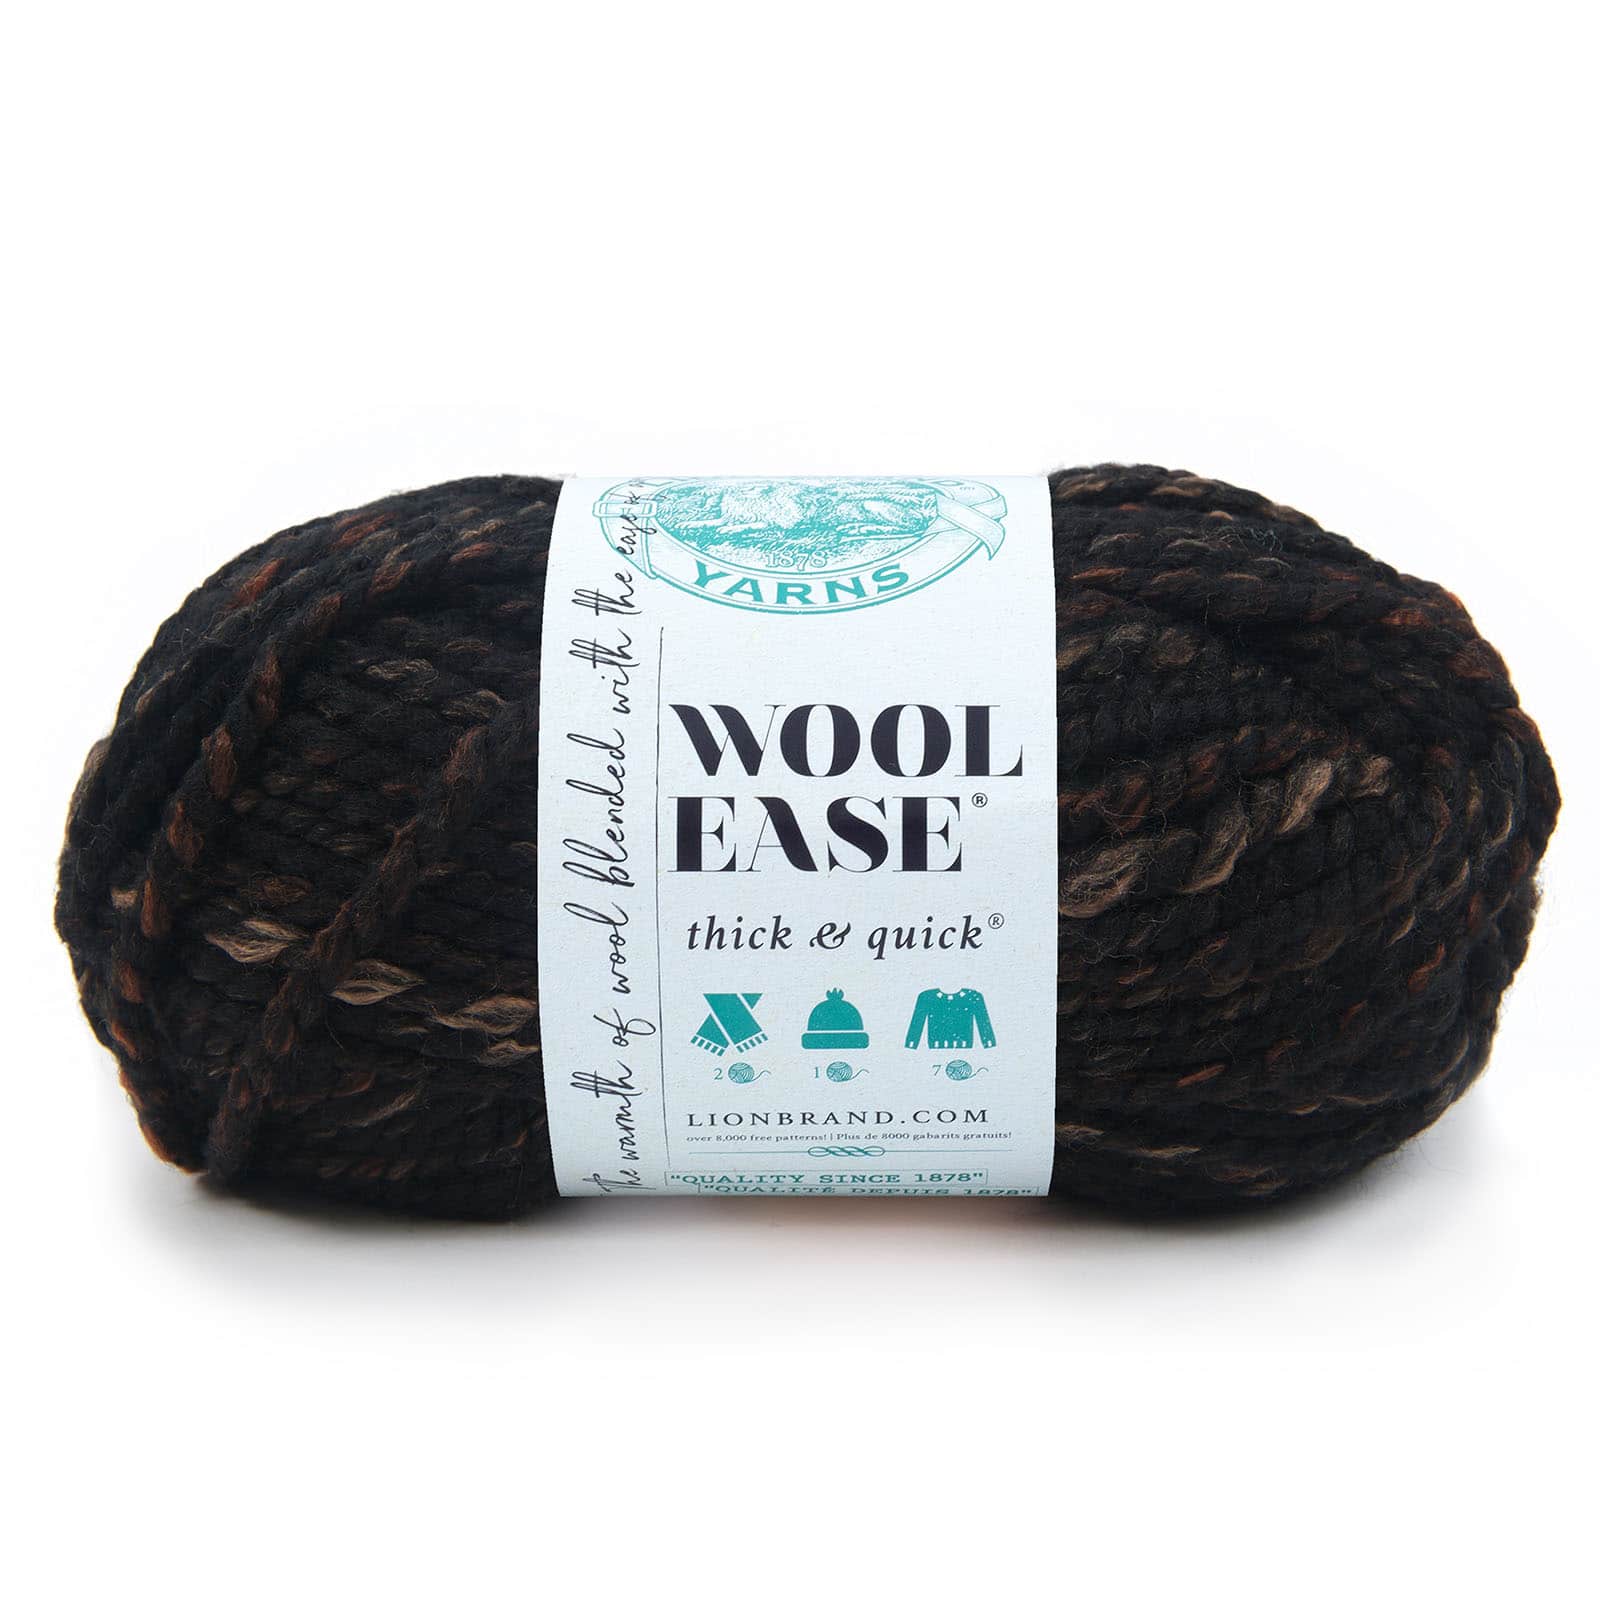 Lion Brand Wool-Ease Thick & Quick Yarn Thaw